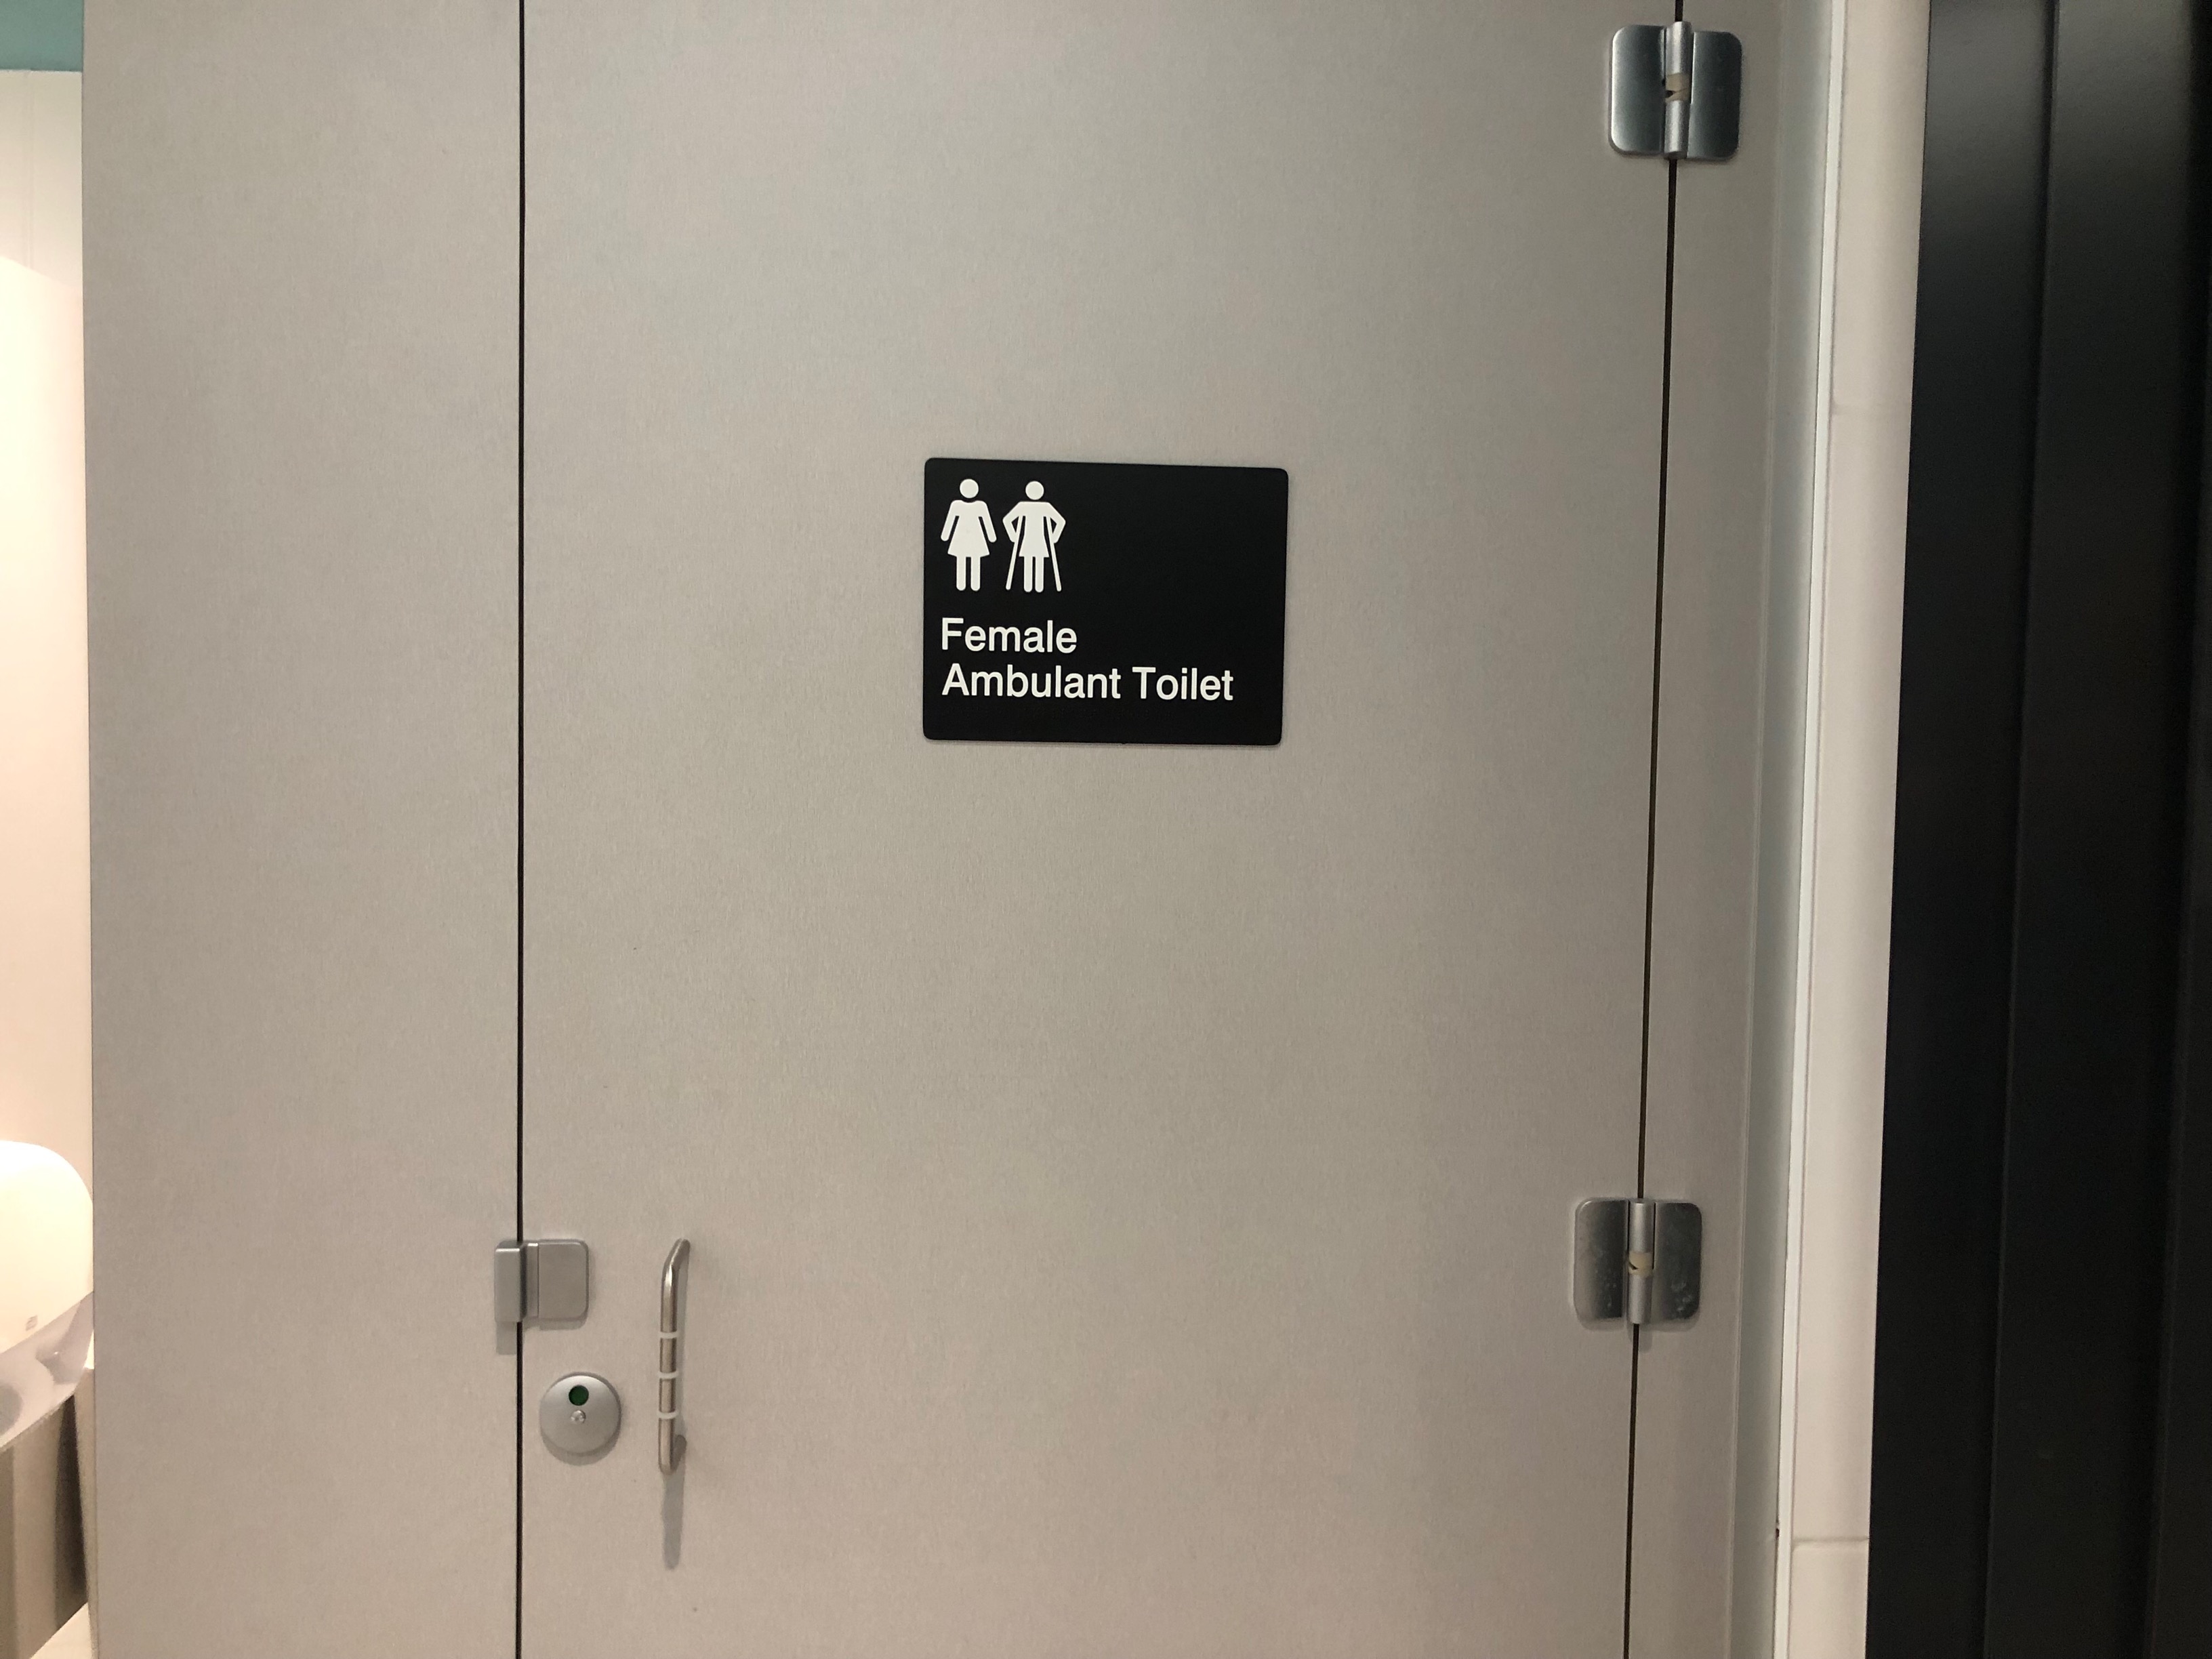 All gender change rooms feature an ambulant toilet and ambulant shower